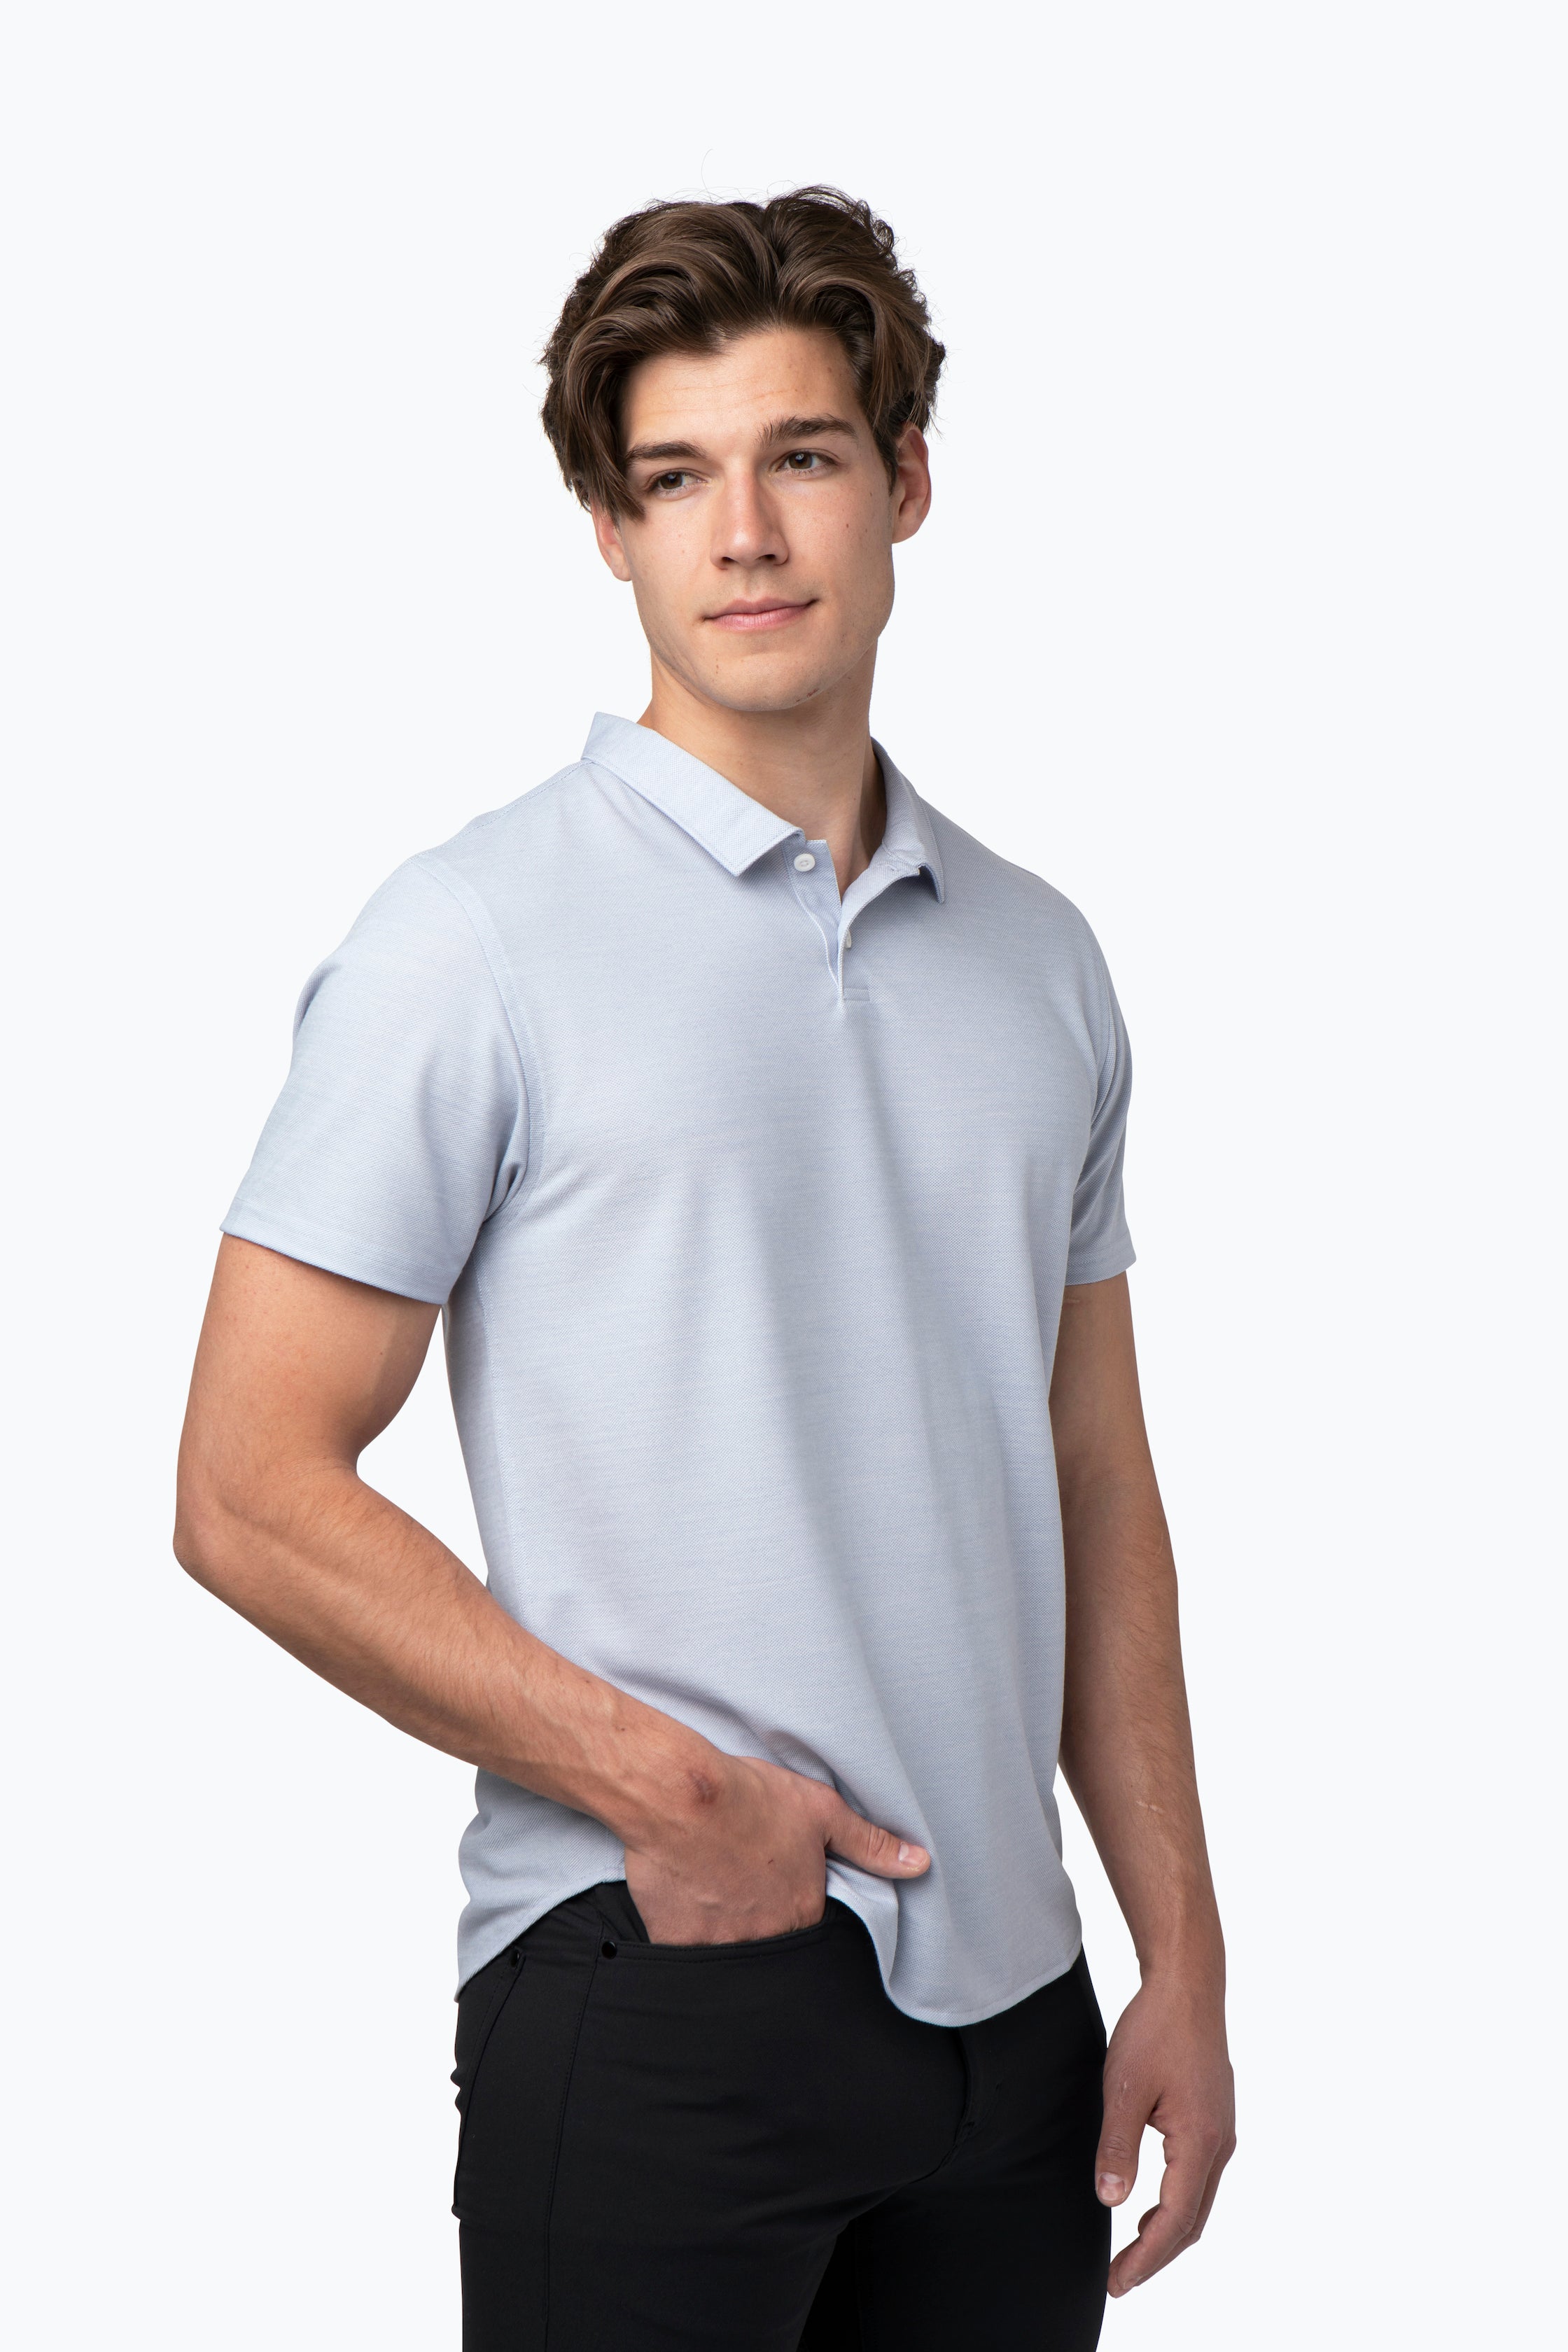 H&W:Ryan is 5’11” 190lbs wearing size L#color_light blue